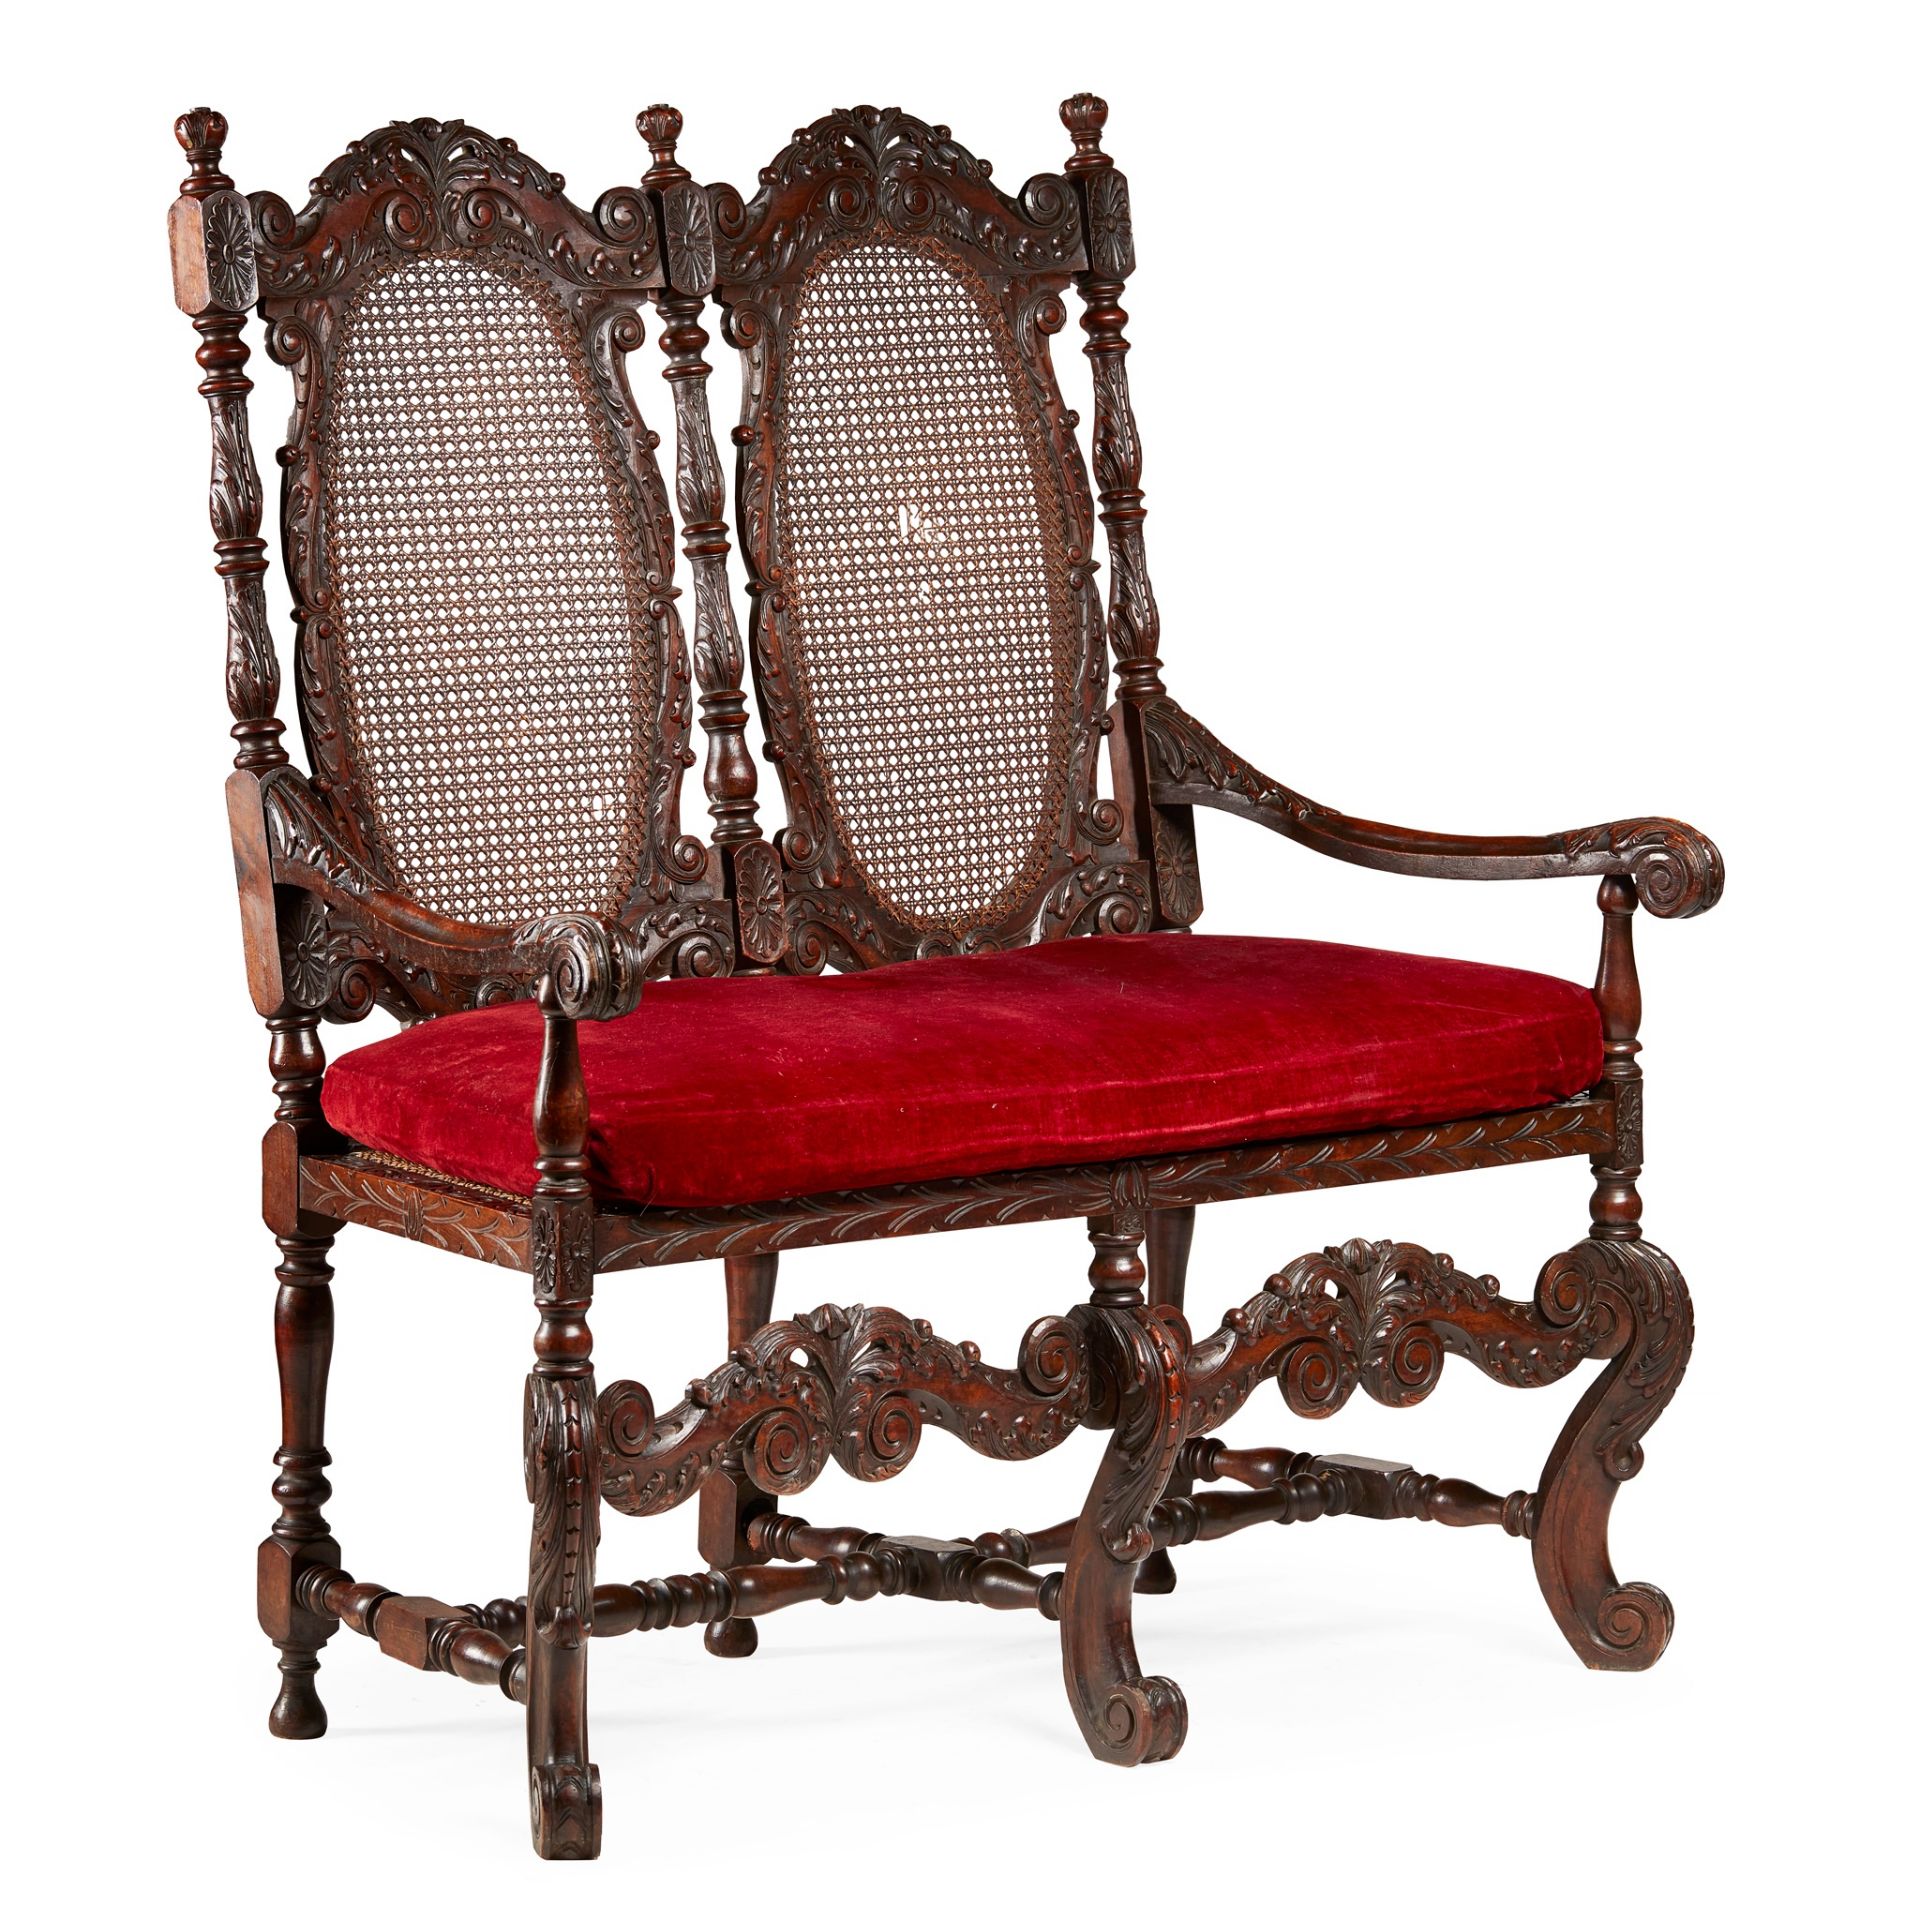 WILLIAM AND MARY STYLE WALNUT AND CANED HALL SEAT 19TH CENTURY